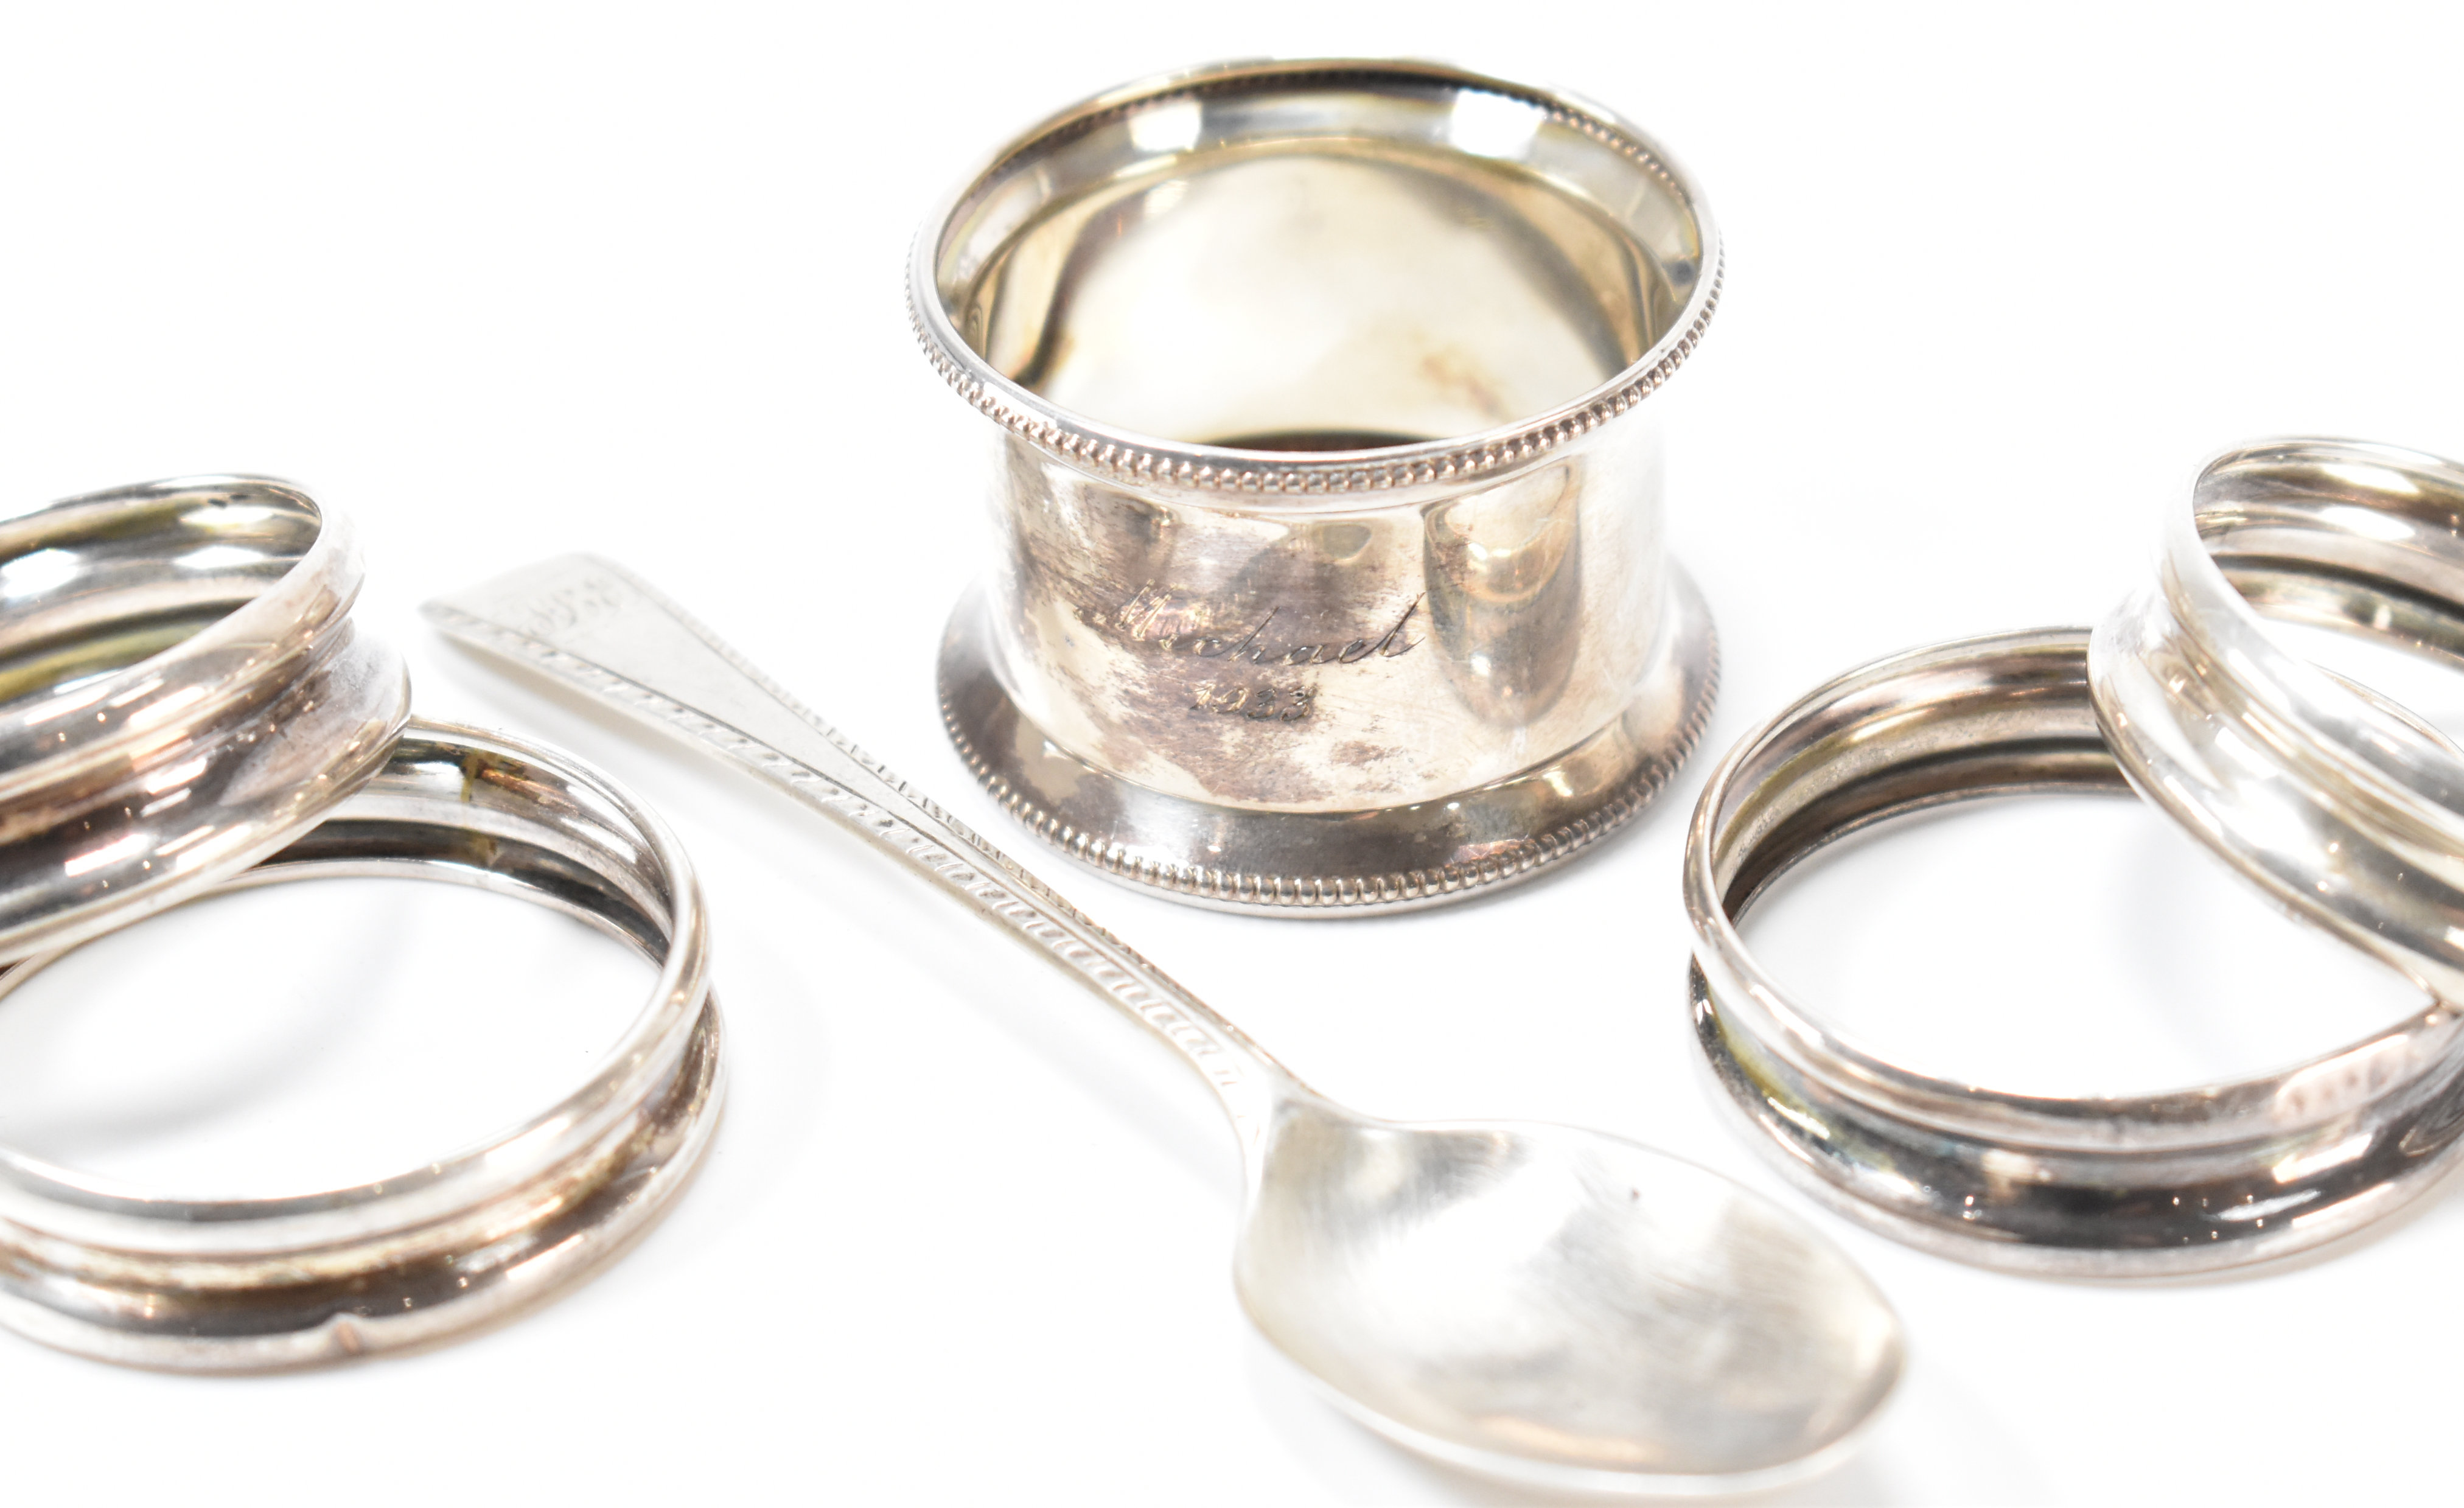 GROUP OF SILVER HALLMARKED ITEMS - NAPKIN RINGS & SPOON - Image 4 of 5